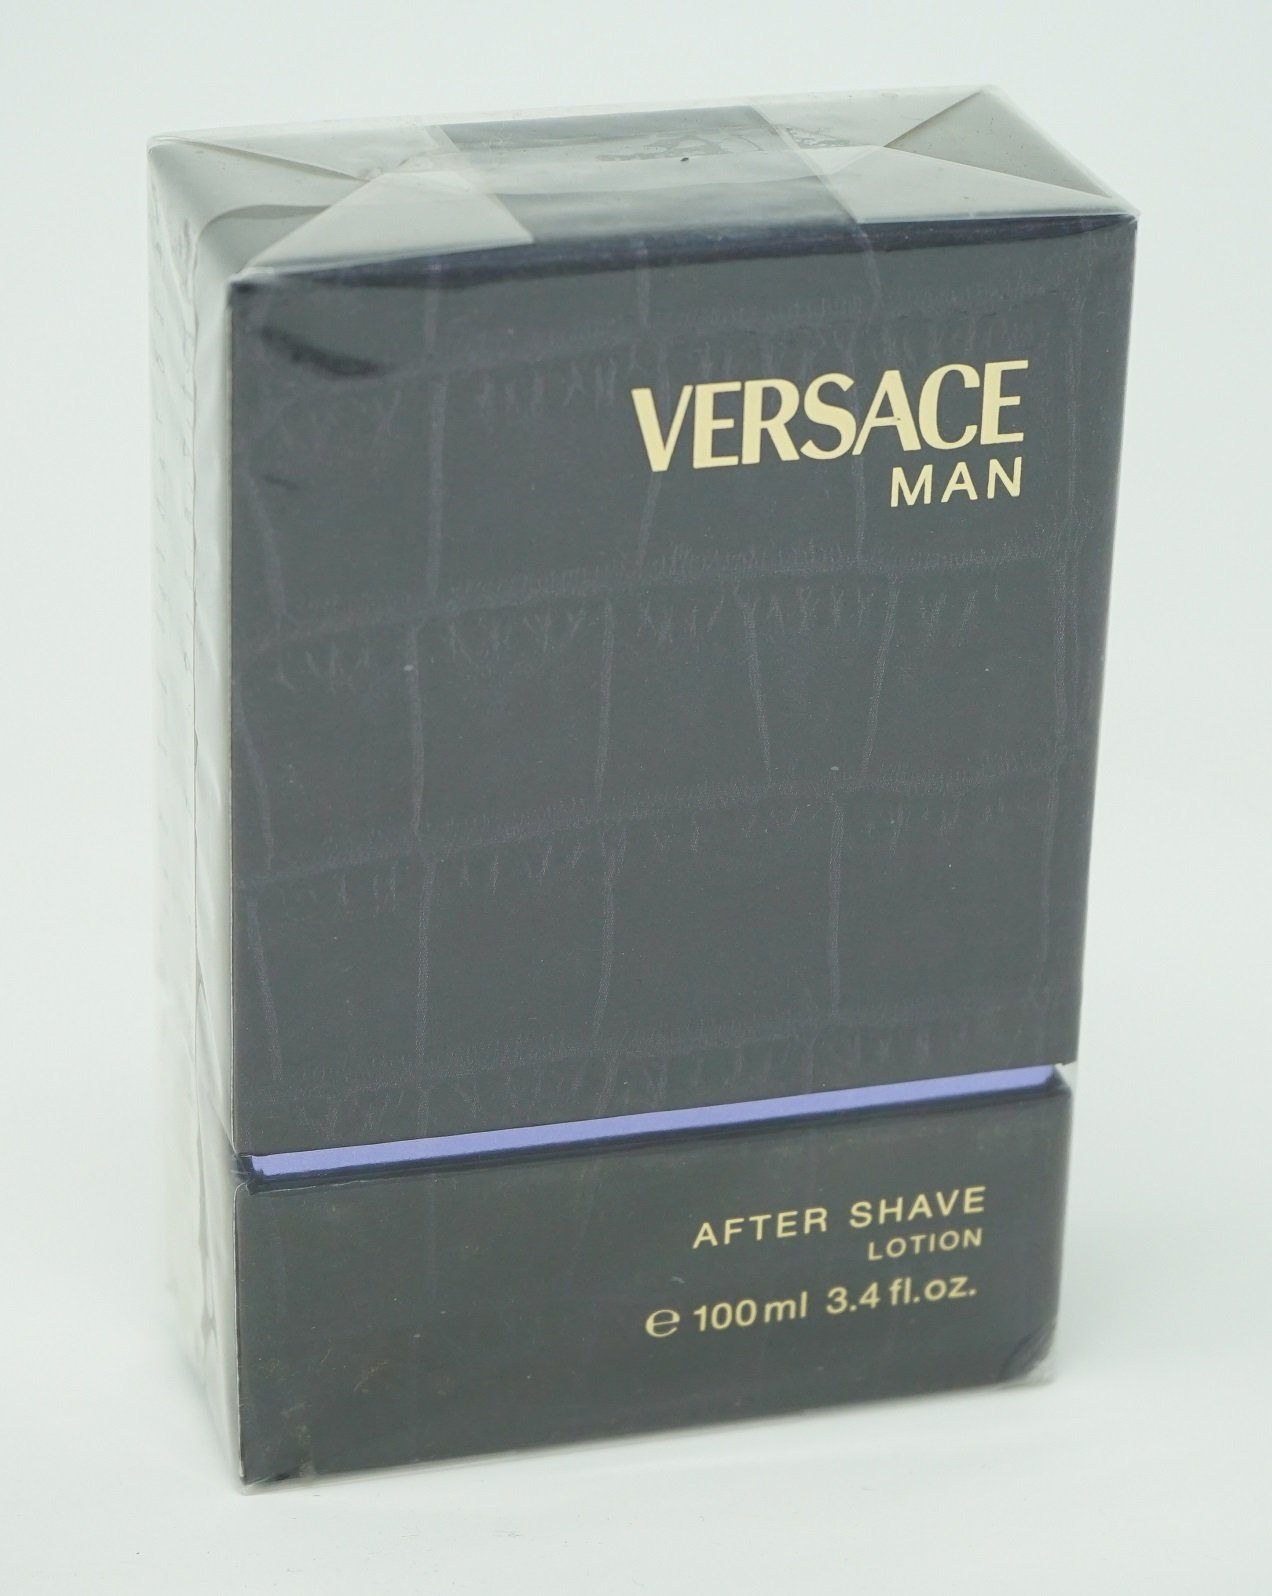 After Shave Lotion Shave Man After Versace 100ml Versace Lotion